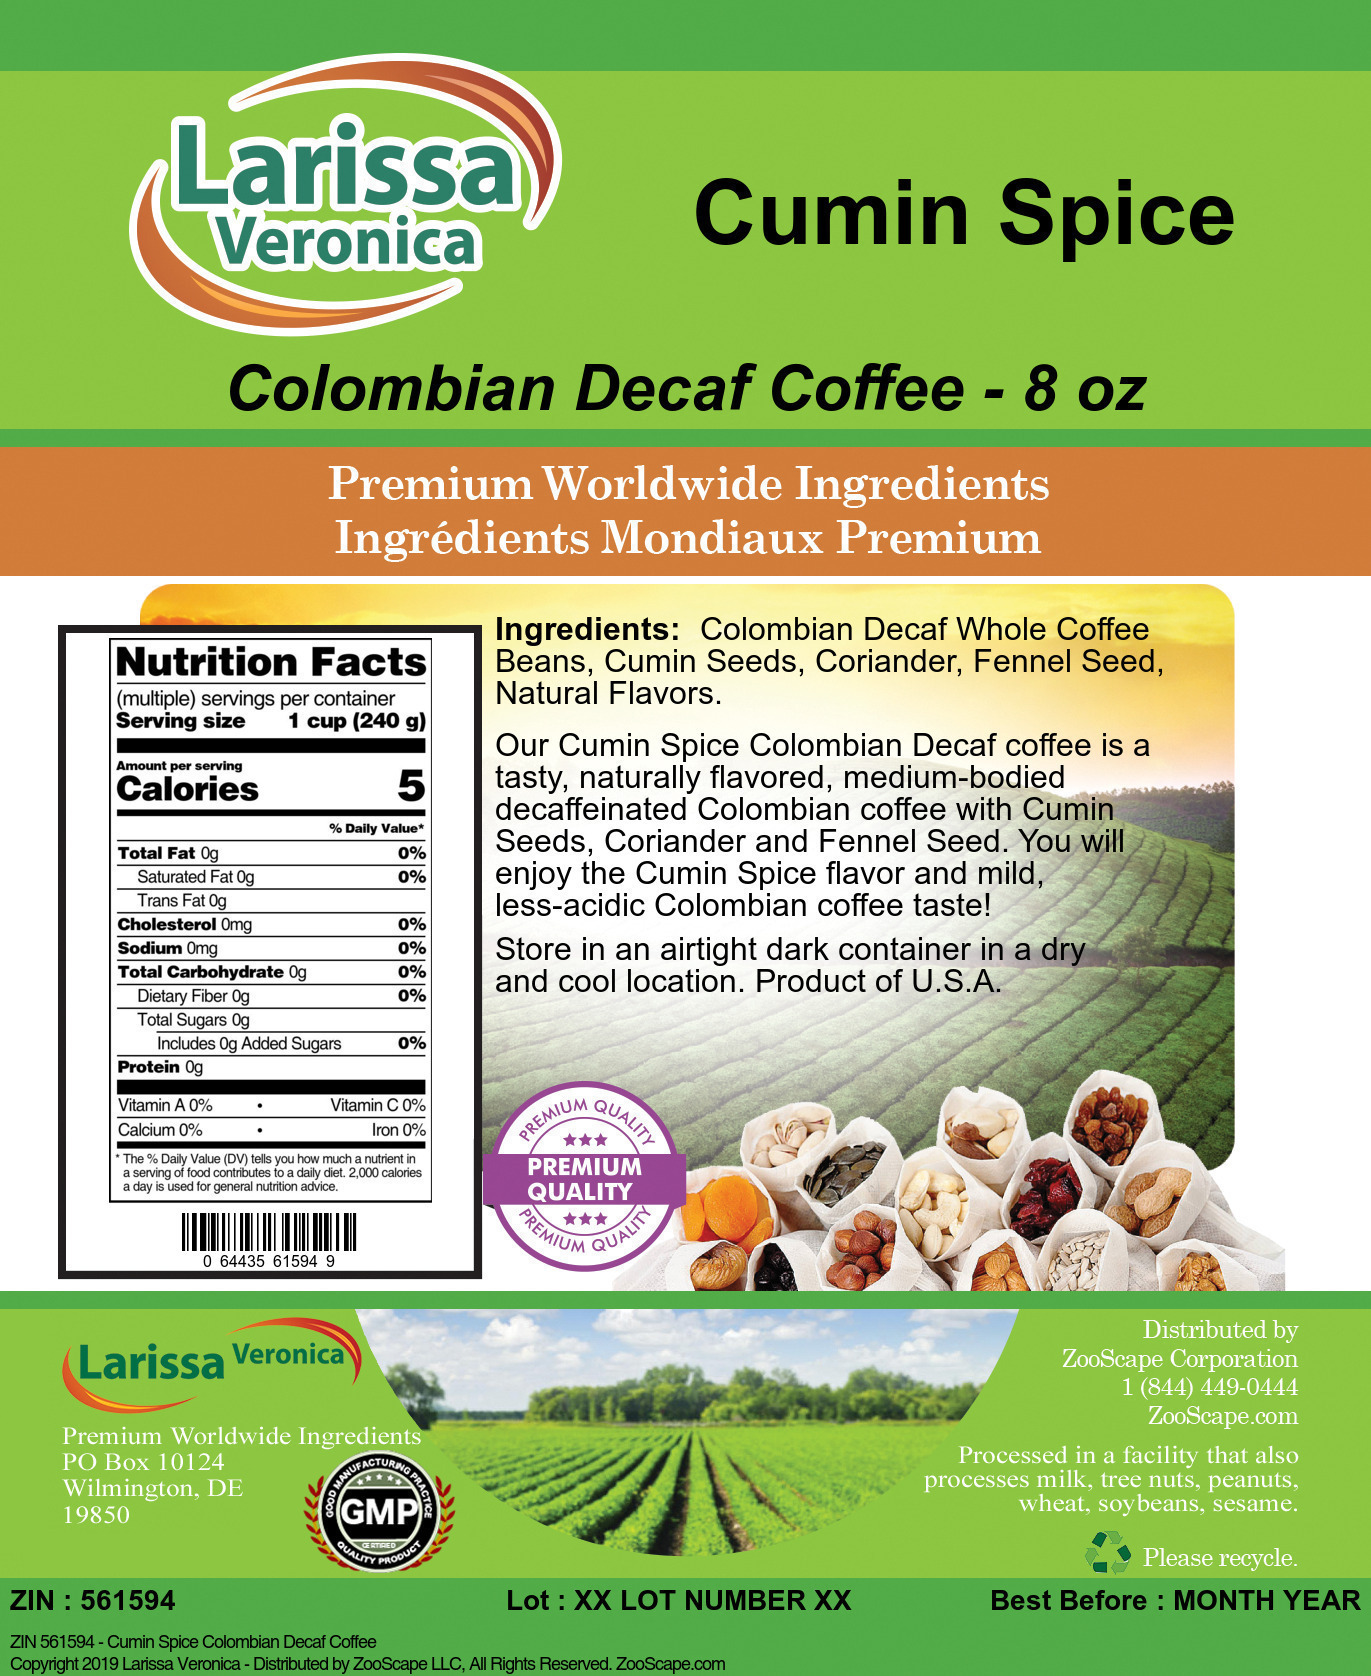 Cumin Spice Colombian Decaf Coffee - Label